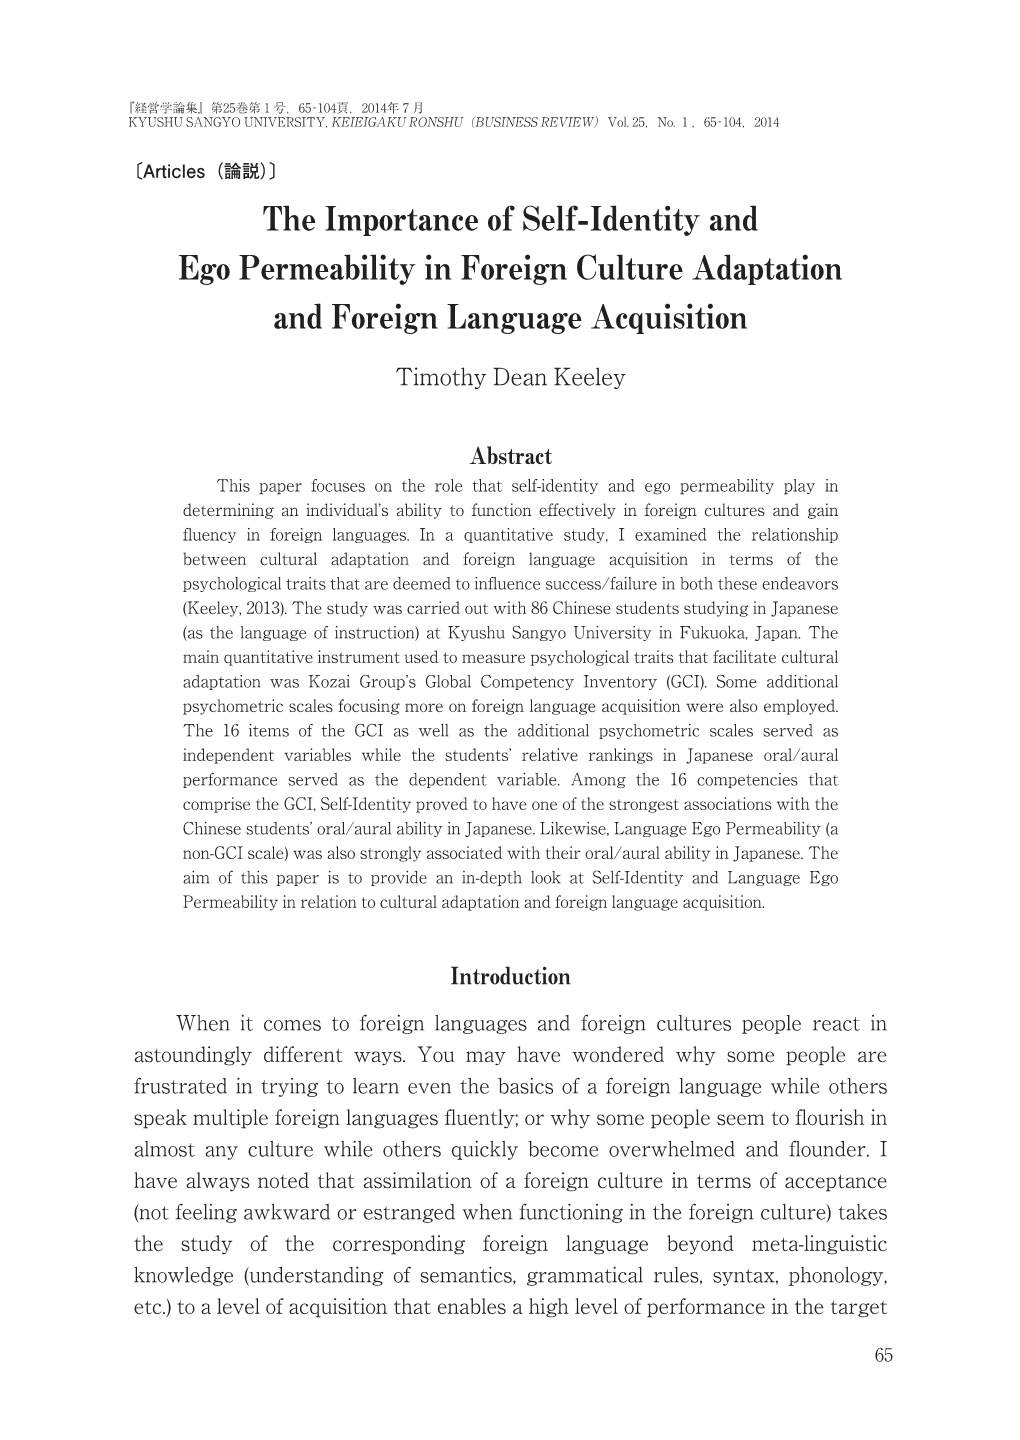 The Importance of Self-Identity and Ego Permeability in Foreign Culture Adaptation and Foreign Language Acquisition